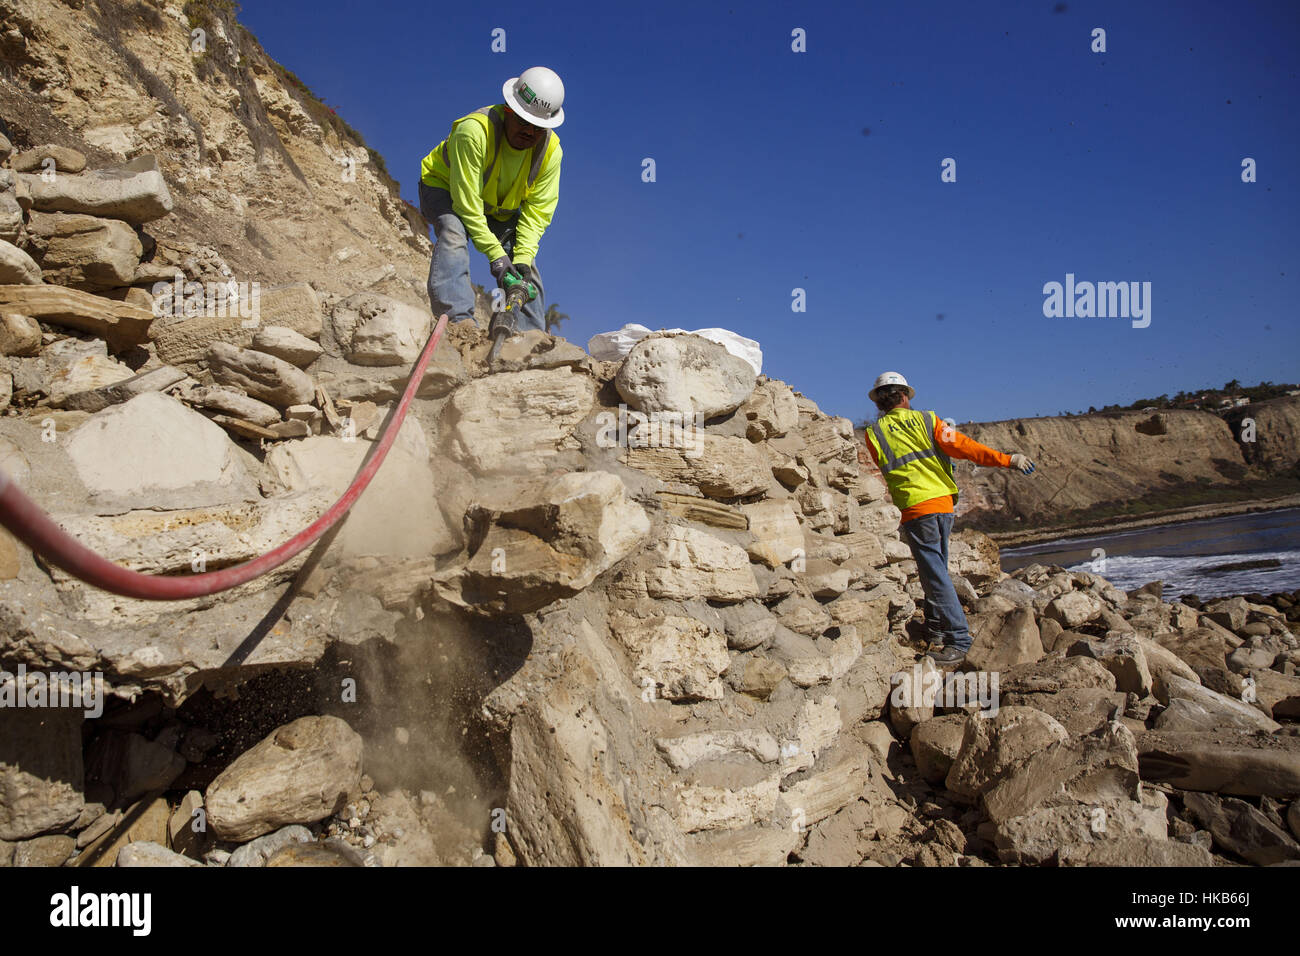 Palos Verdes Estates, CA, USA. 29th Nov, 2016. A city contractor uses a jackhammer to demolish a patio fort built by local surfers on the shoreline of the Pacific Ocean at Lunada Bay on Tuesday, November 29, 2016 in Palos Verdes Estates, Calif. The patio fort was a popular hangout of the Lunada Bay Boys and the process of tearing it down has become a flashpoint in the debate over surfing localism. © 2016 Patrick T. Fallon Credit: Patrick Fallon/ZUMA Wire/Alamy Live News Stock Photo